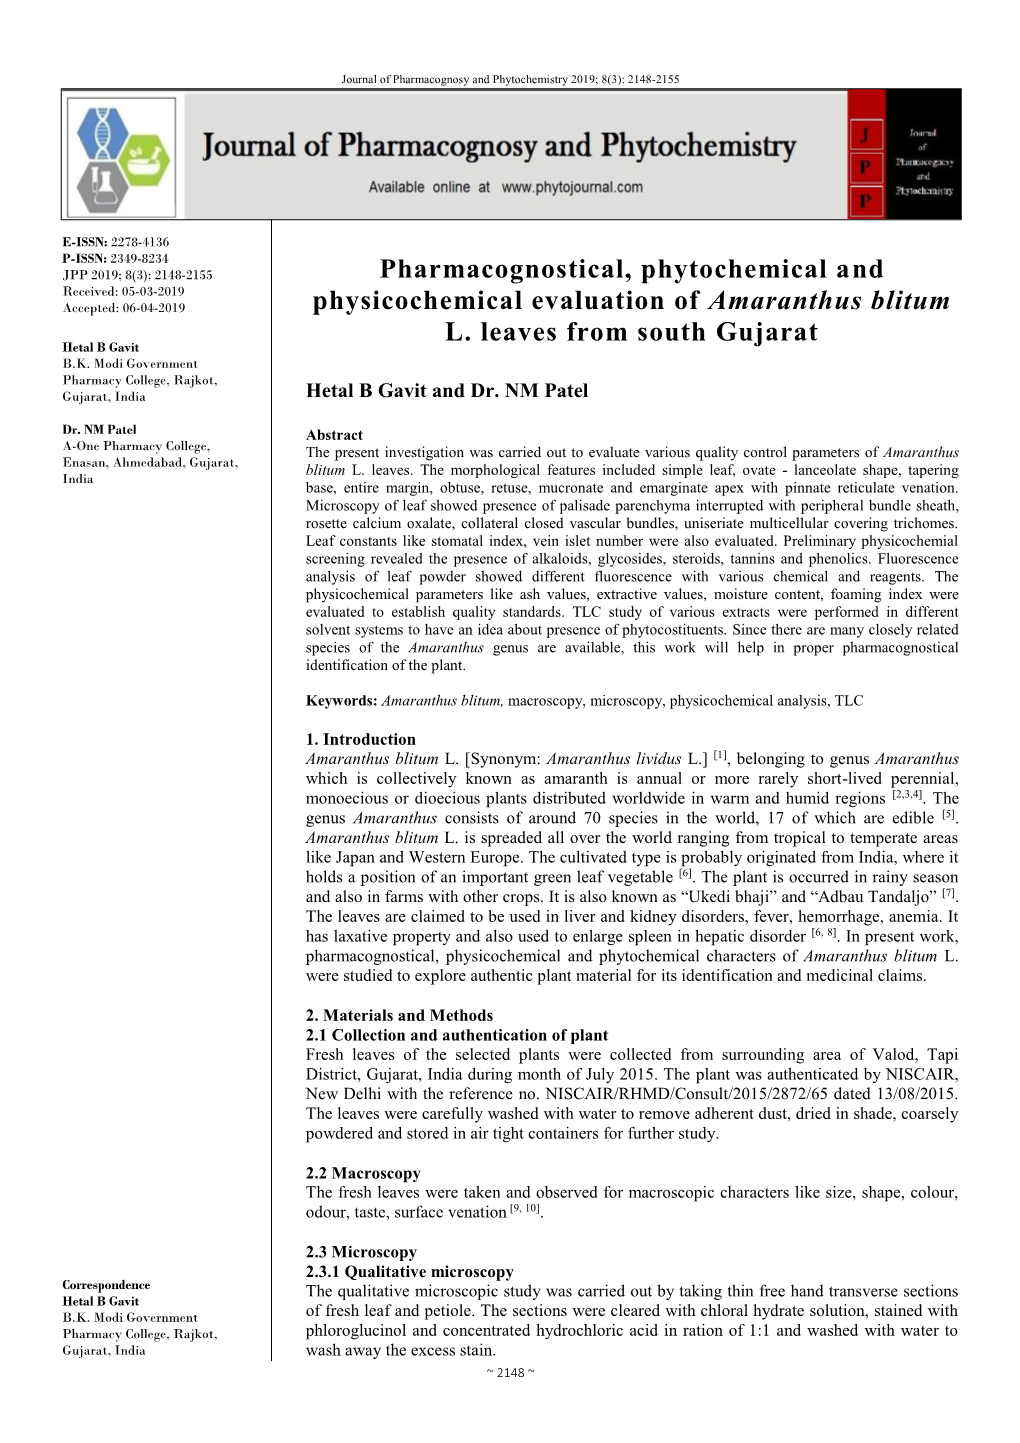 Pharmacognostical, Phytochemical and Physicochemical Evaluation of Amaranthus Blitum L. Leaves from South Gujarat